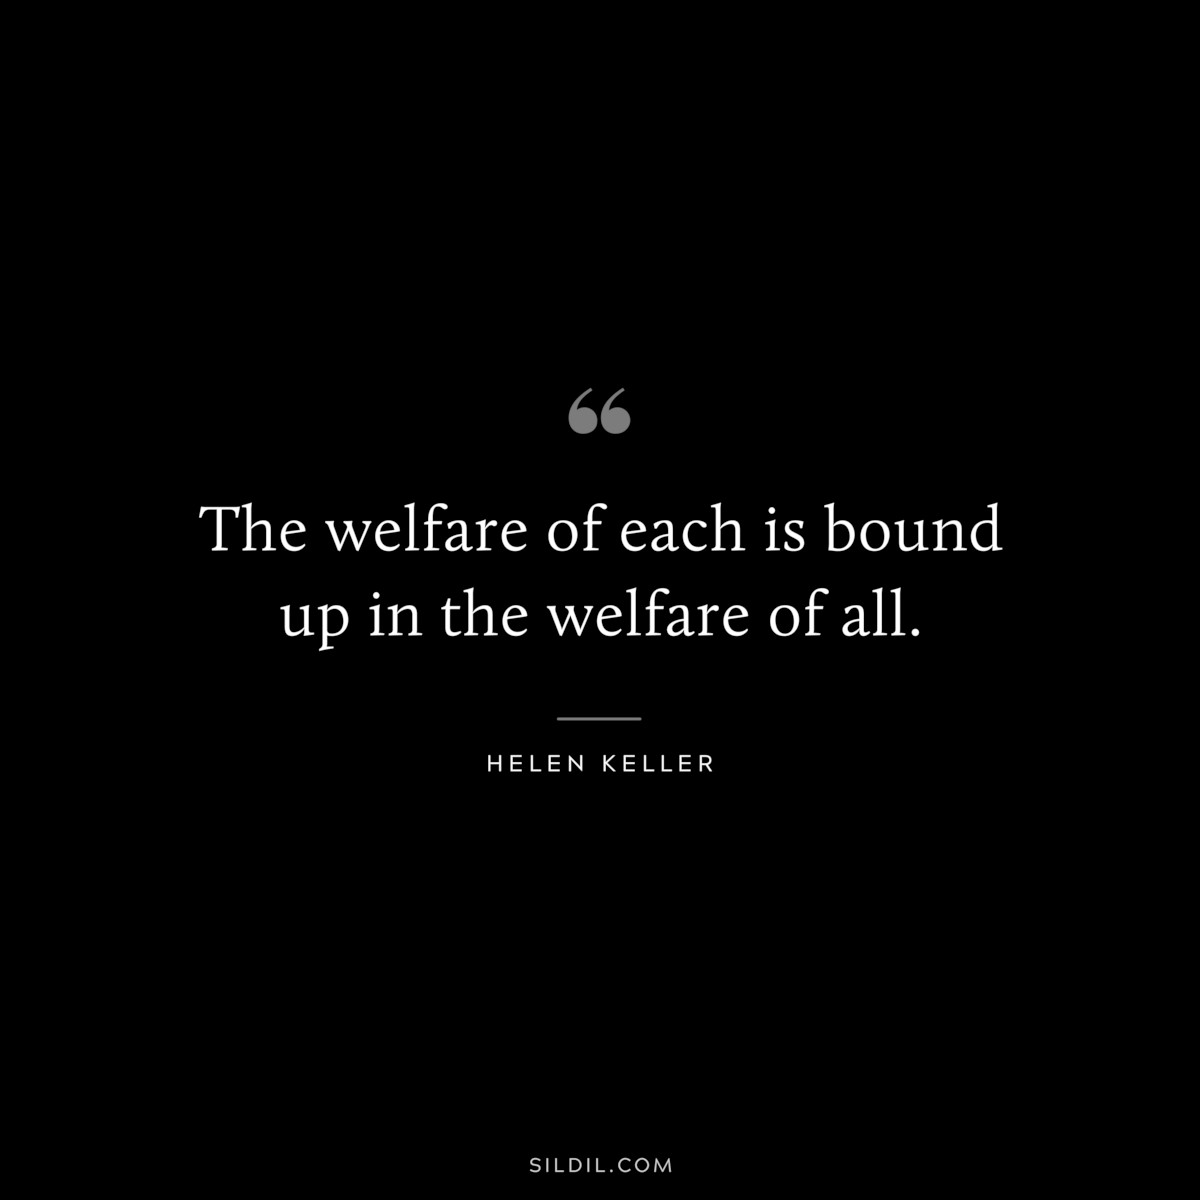 The welfare of each is bound up in the welfare of all. ― Helen Keller